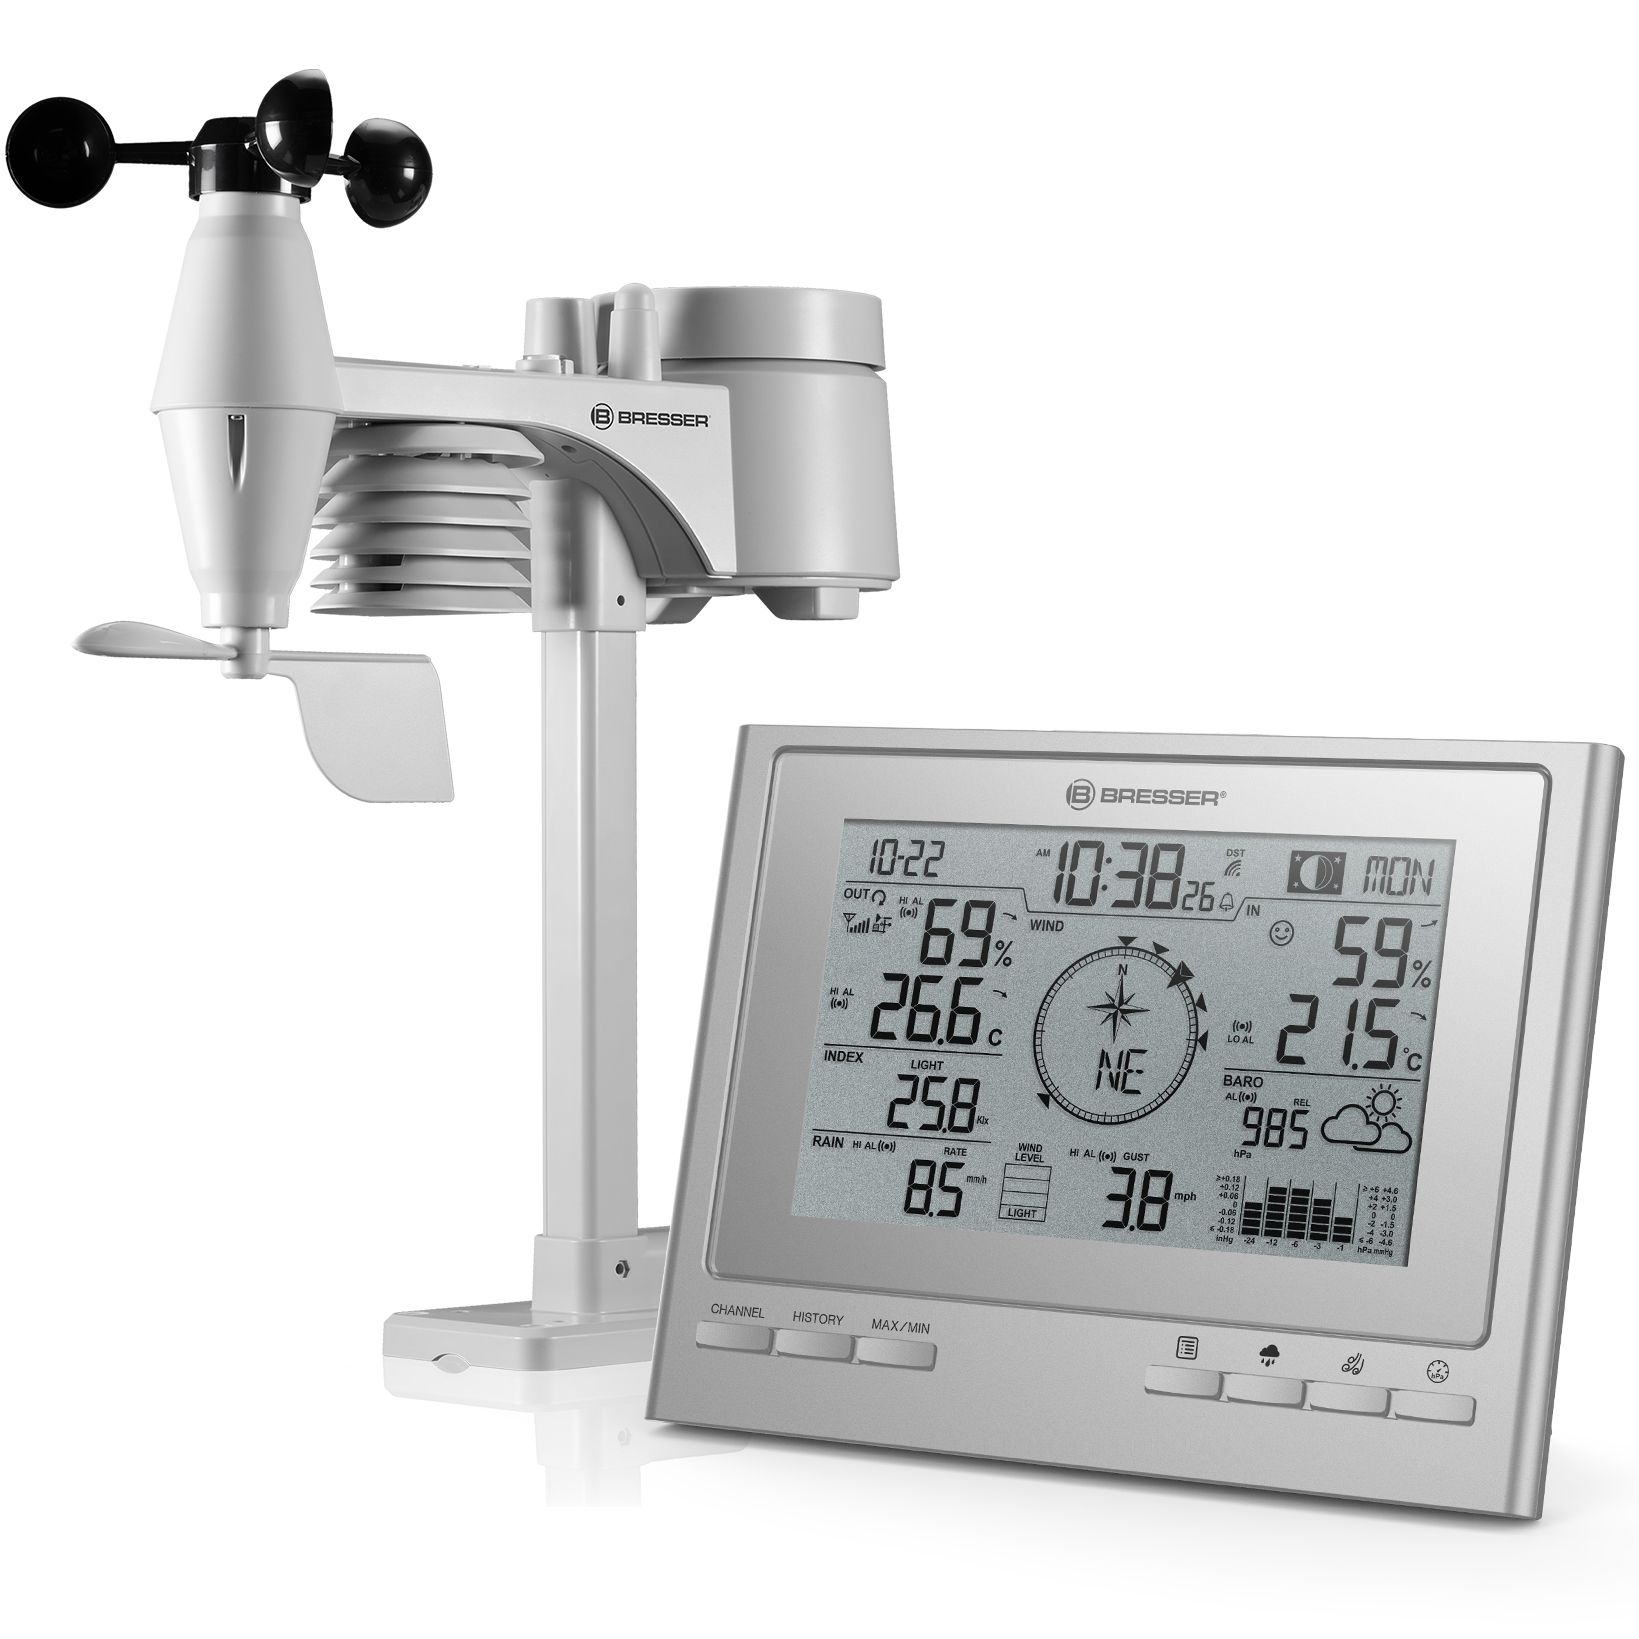 BRESSER 7-in-1 Exklusive ClimateScout Funk Wetterstation